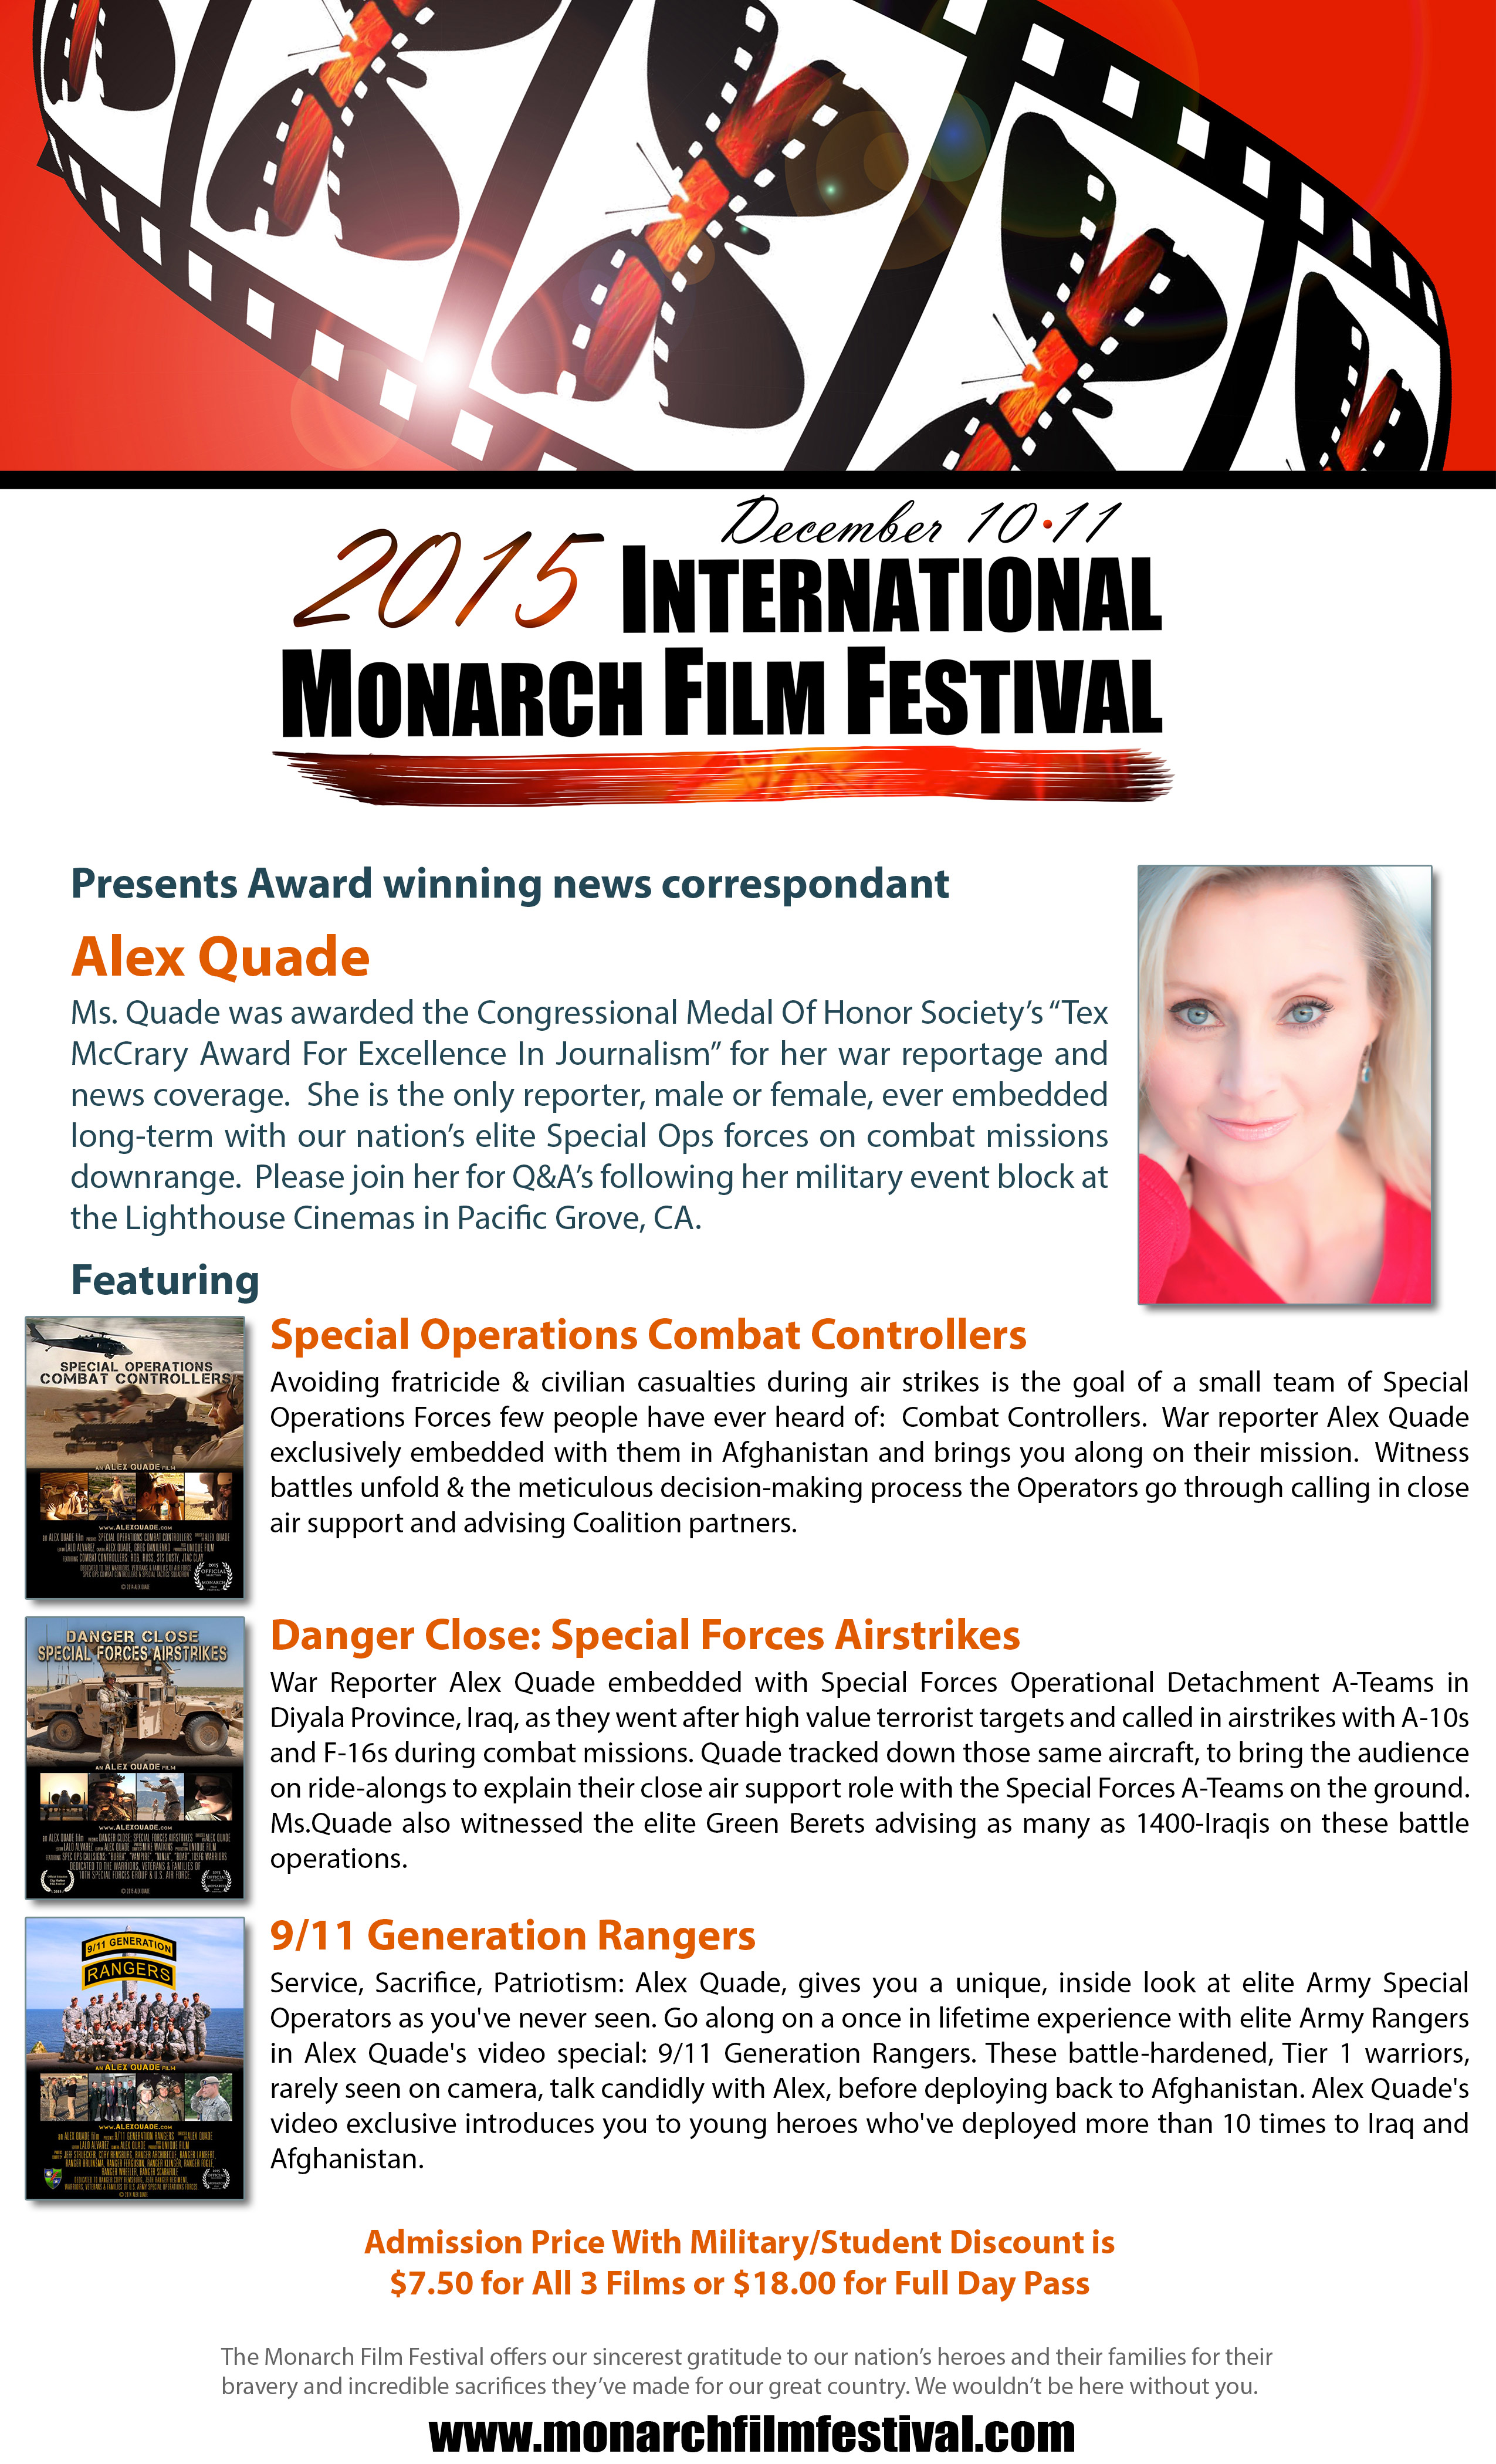 Alex Quade wins Jury Award for her three short documentaries on special operations at the Monarch Film Festival.